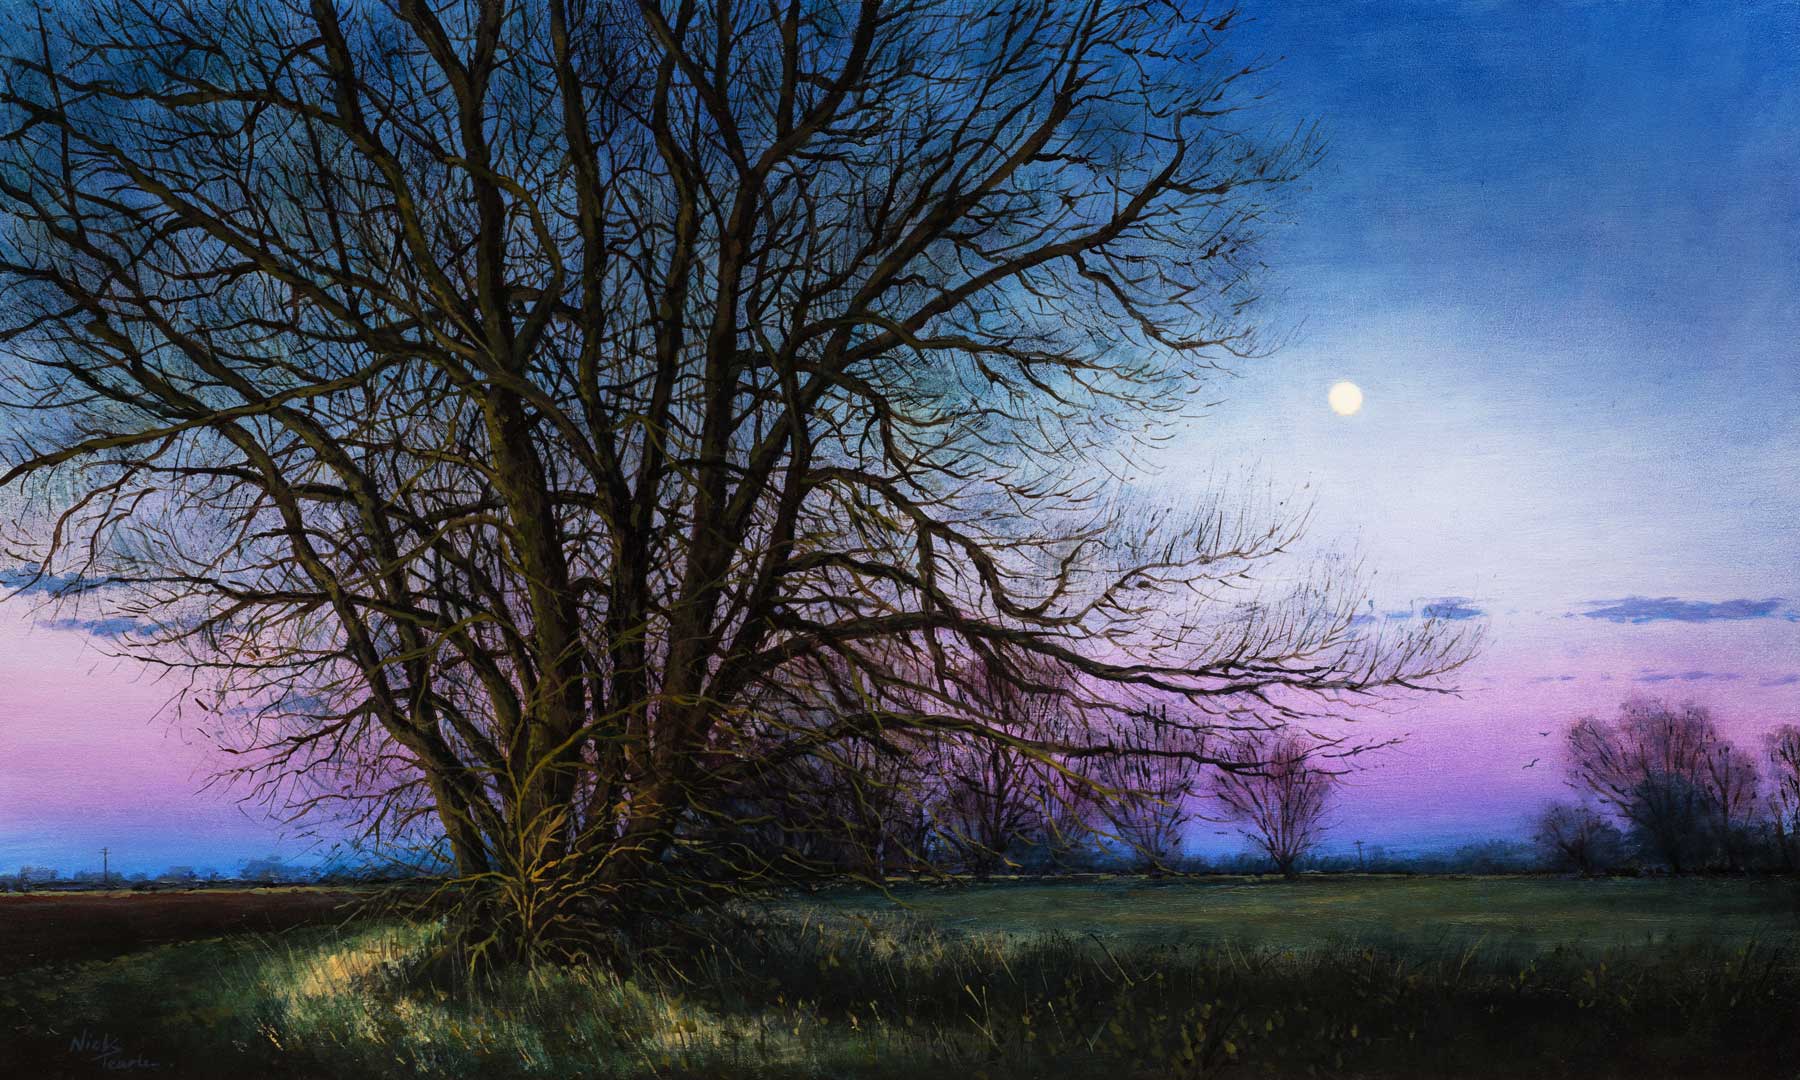 Fenland Moonrise - Oil Painting by Nick Tearle Fenland Artist